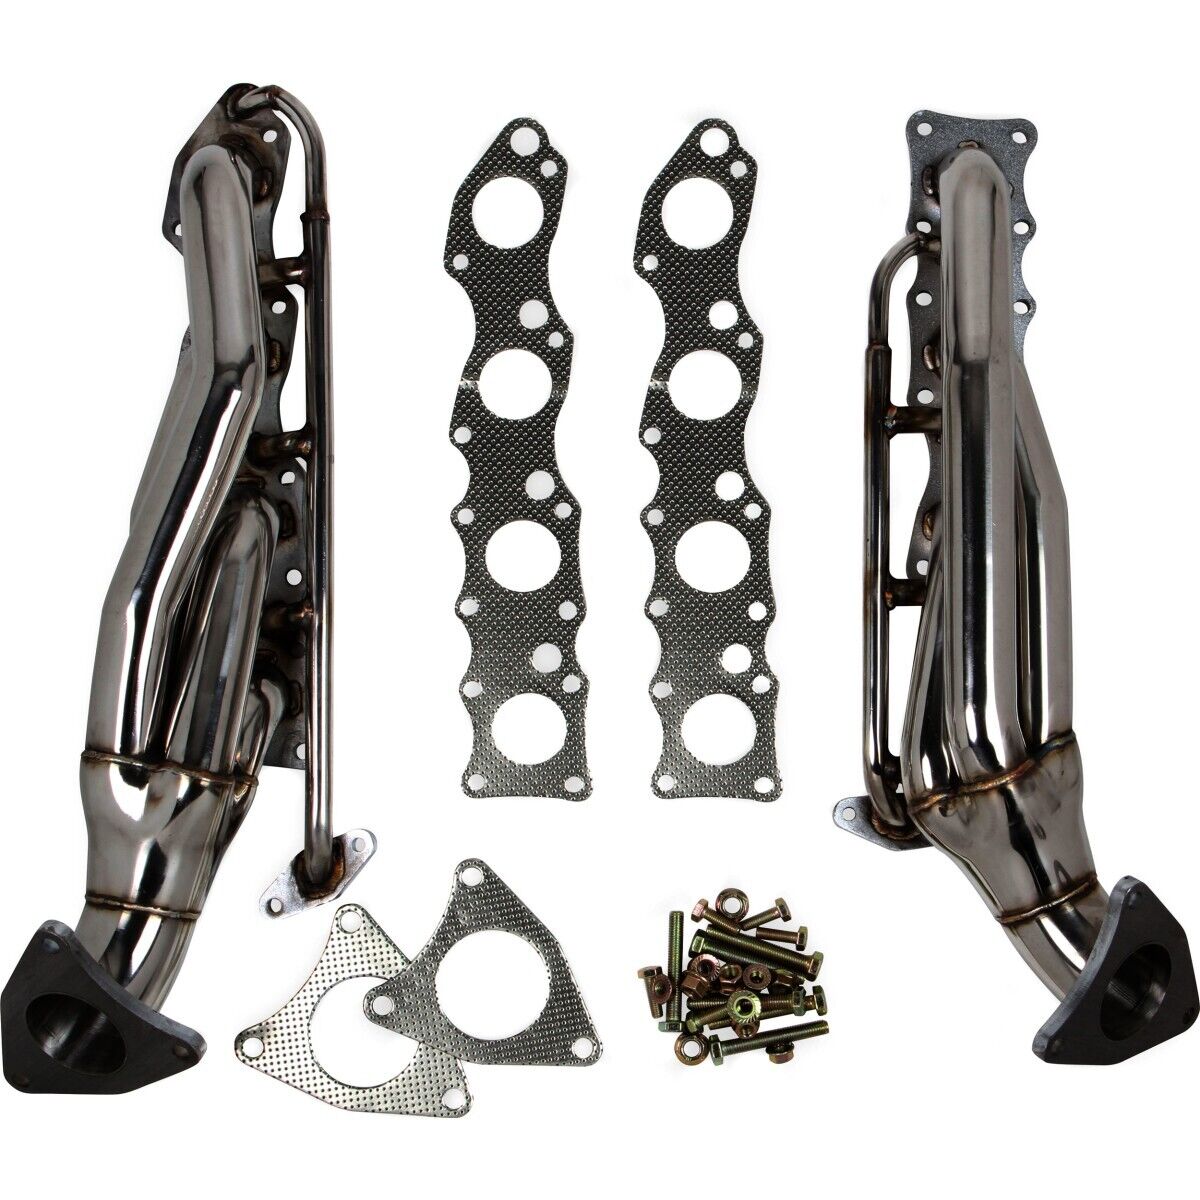 11147FLT Flowtech Set of 2 Headers for Toyota Tundra 2007-2014 Pair